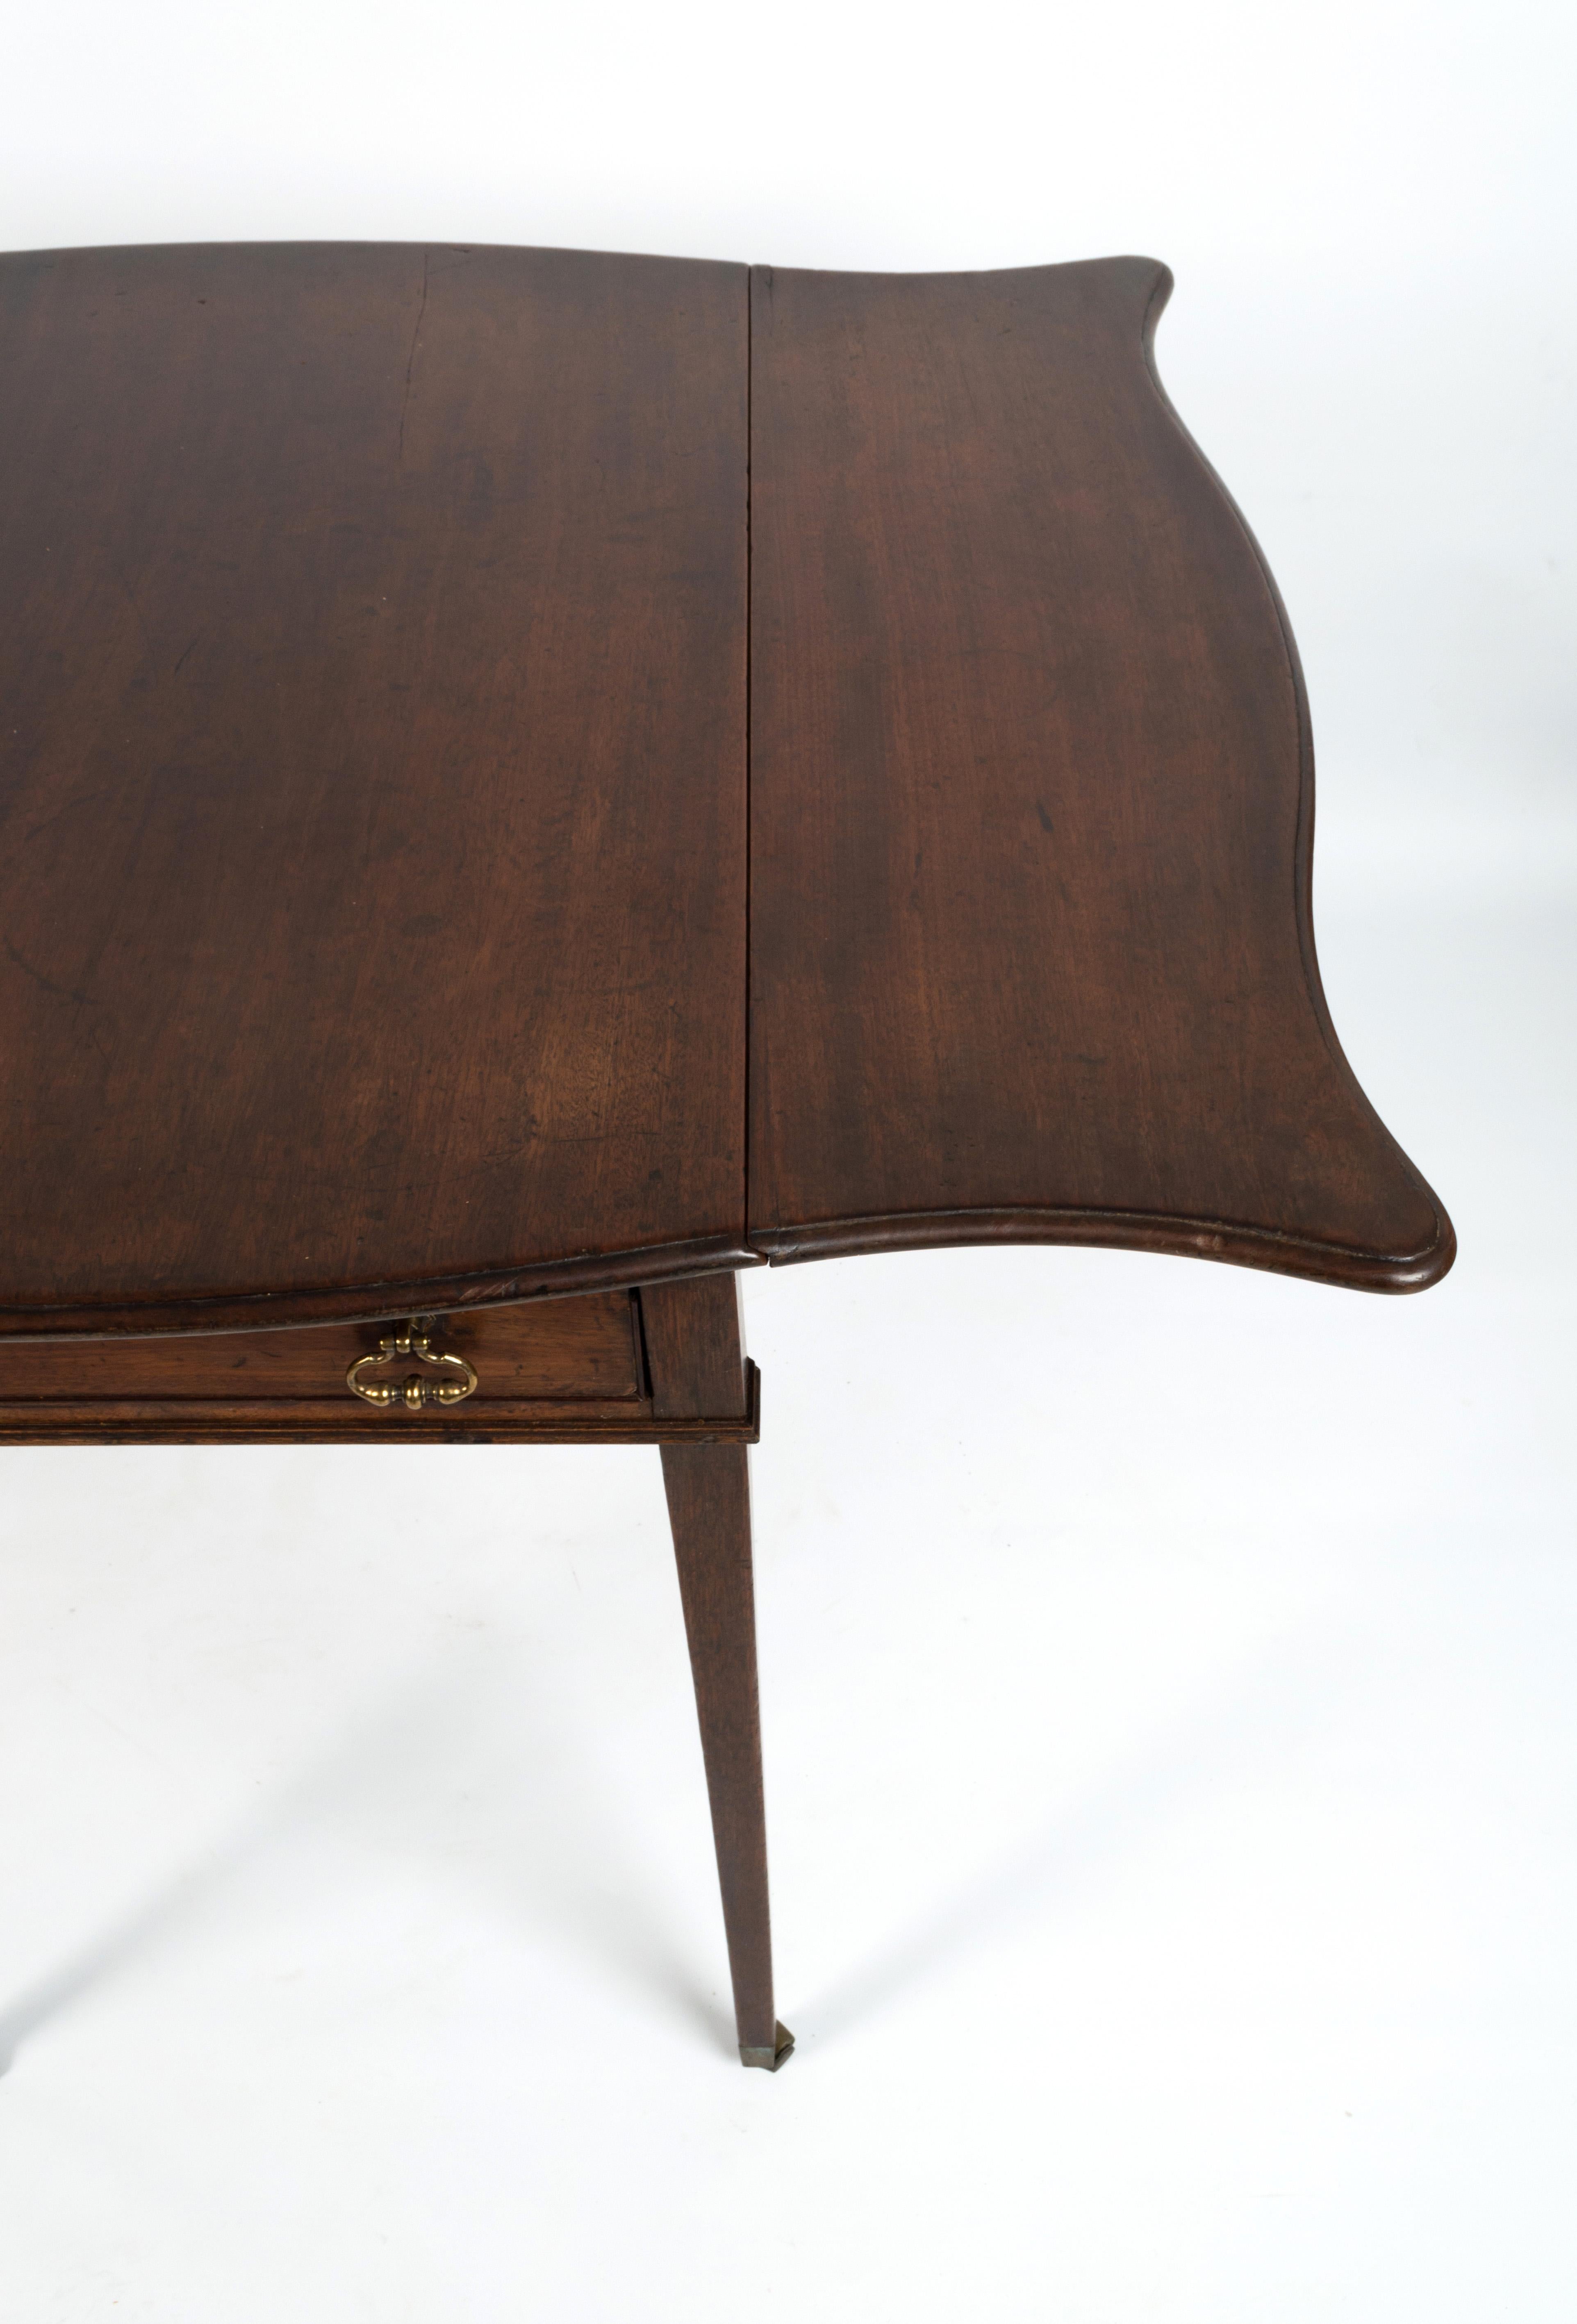 Antique English 18th Century George III Mahogany Butterfly Pembroke Table C.1780 For Sale 5